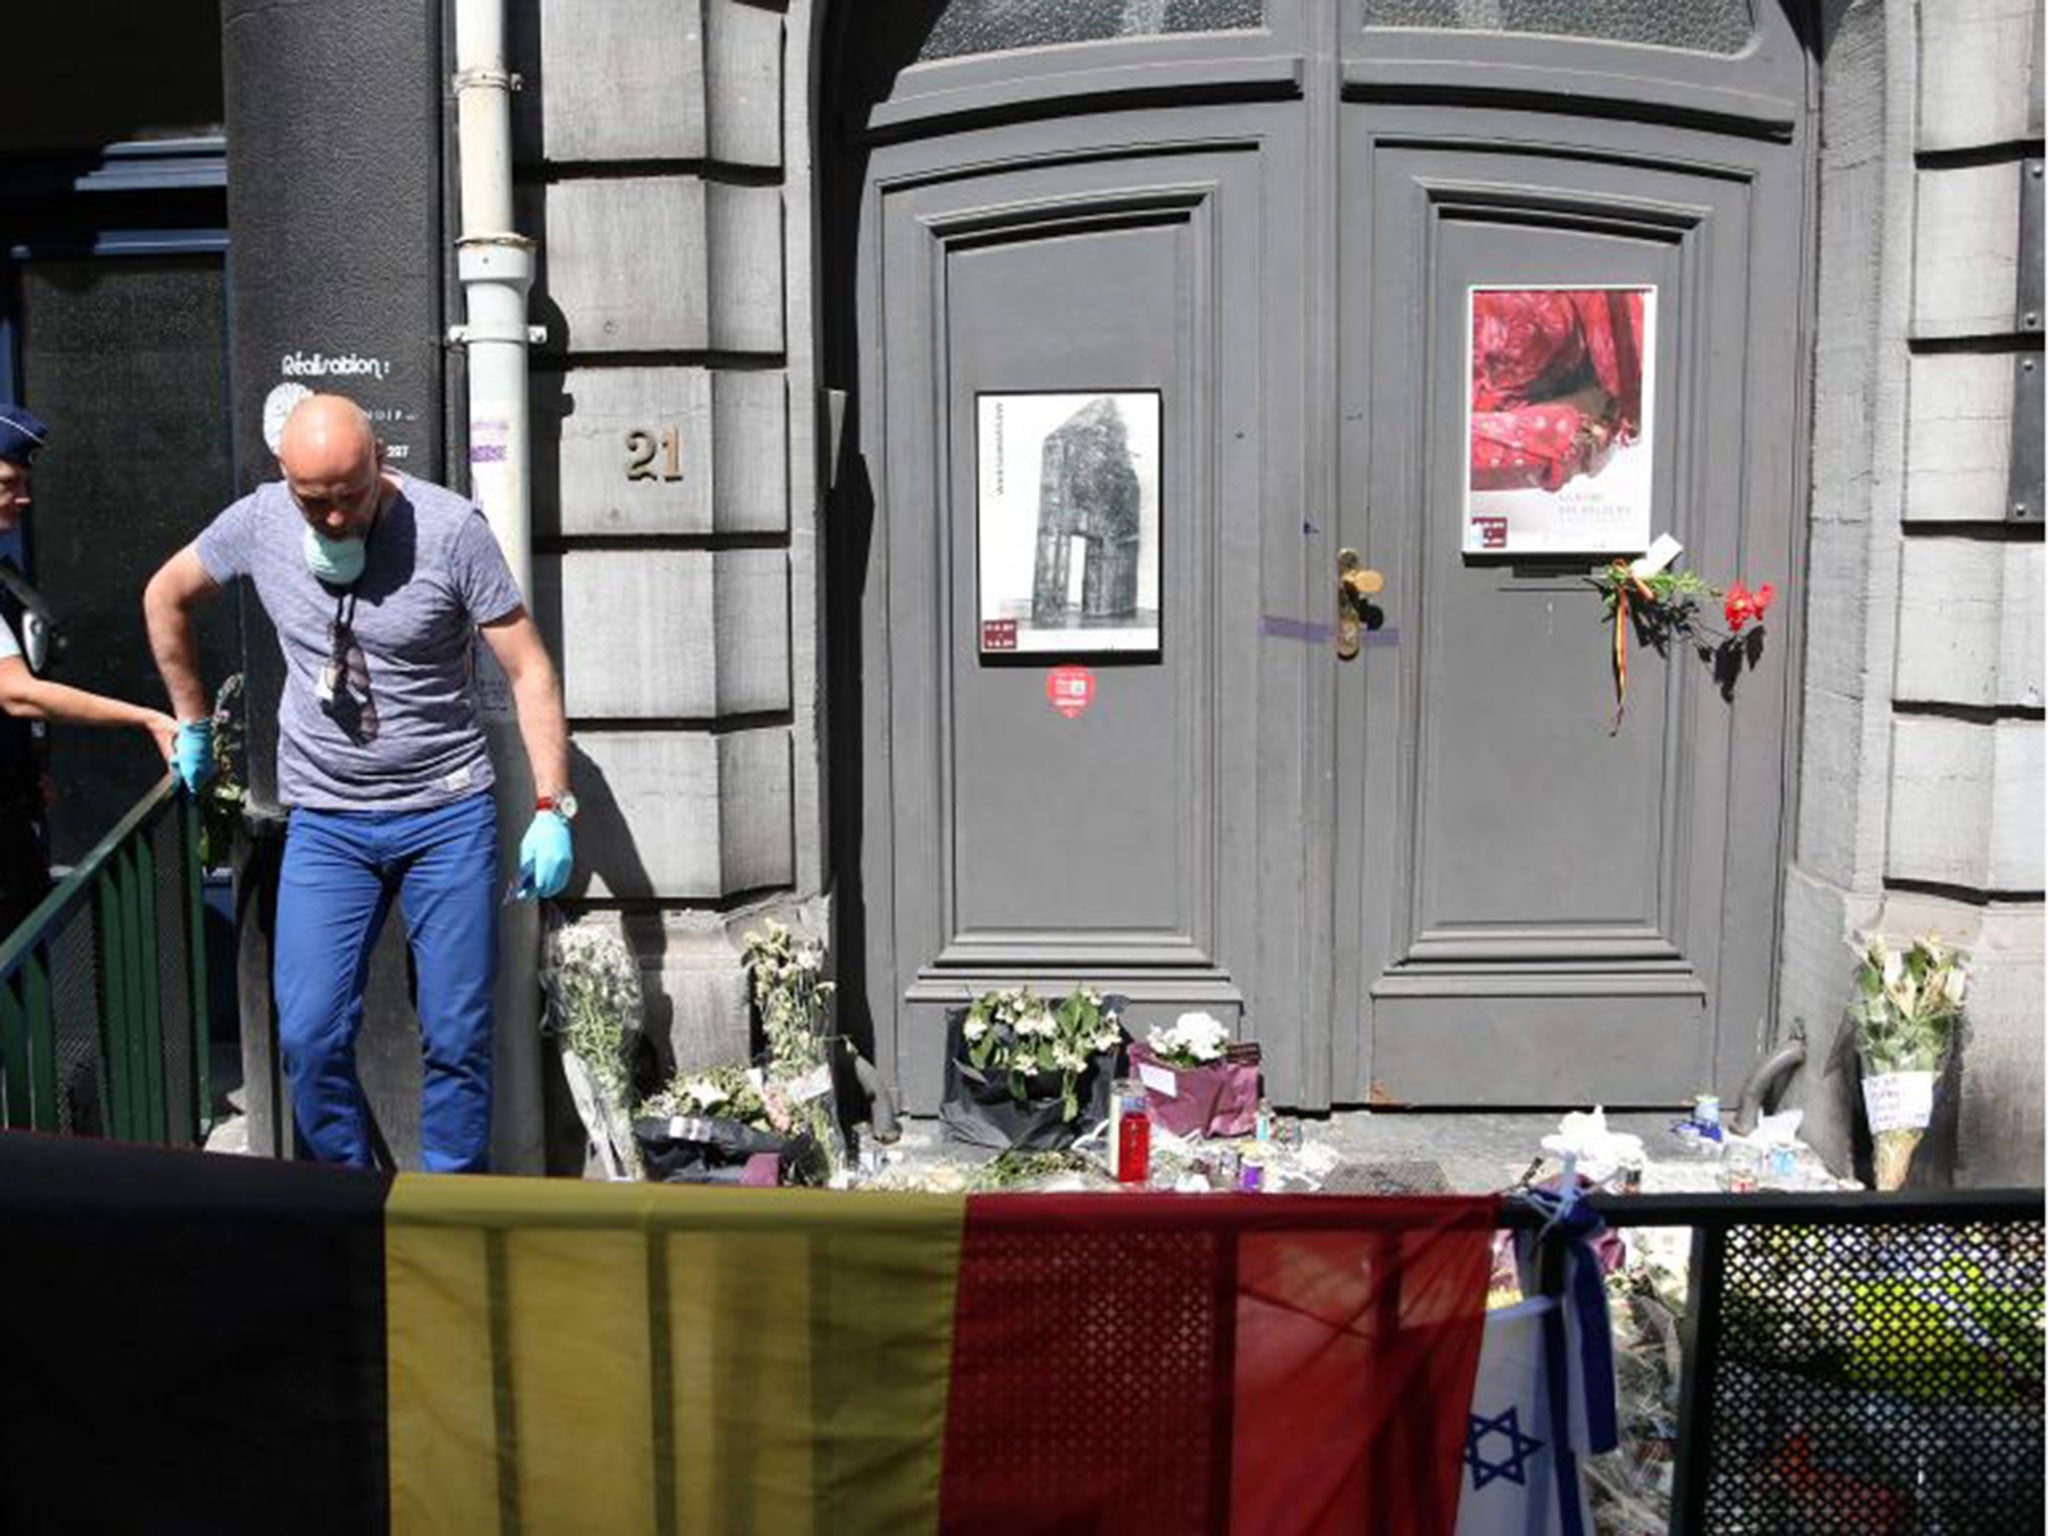 A federal crime scene investigator at the scene outside the Jewish Museum in Brussels